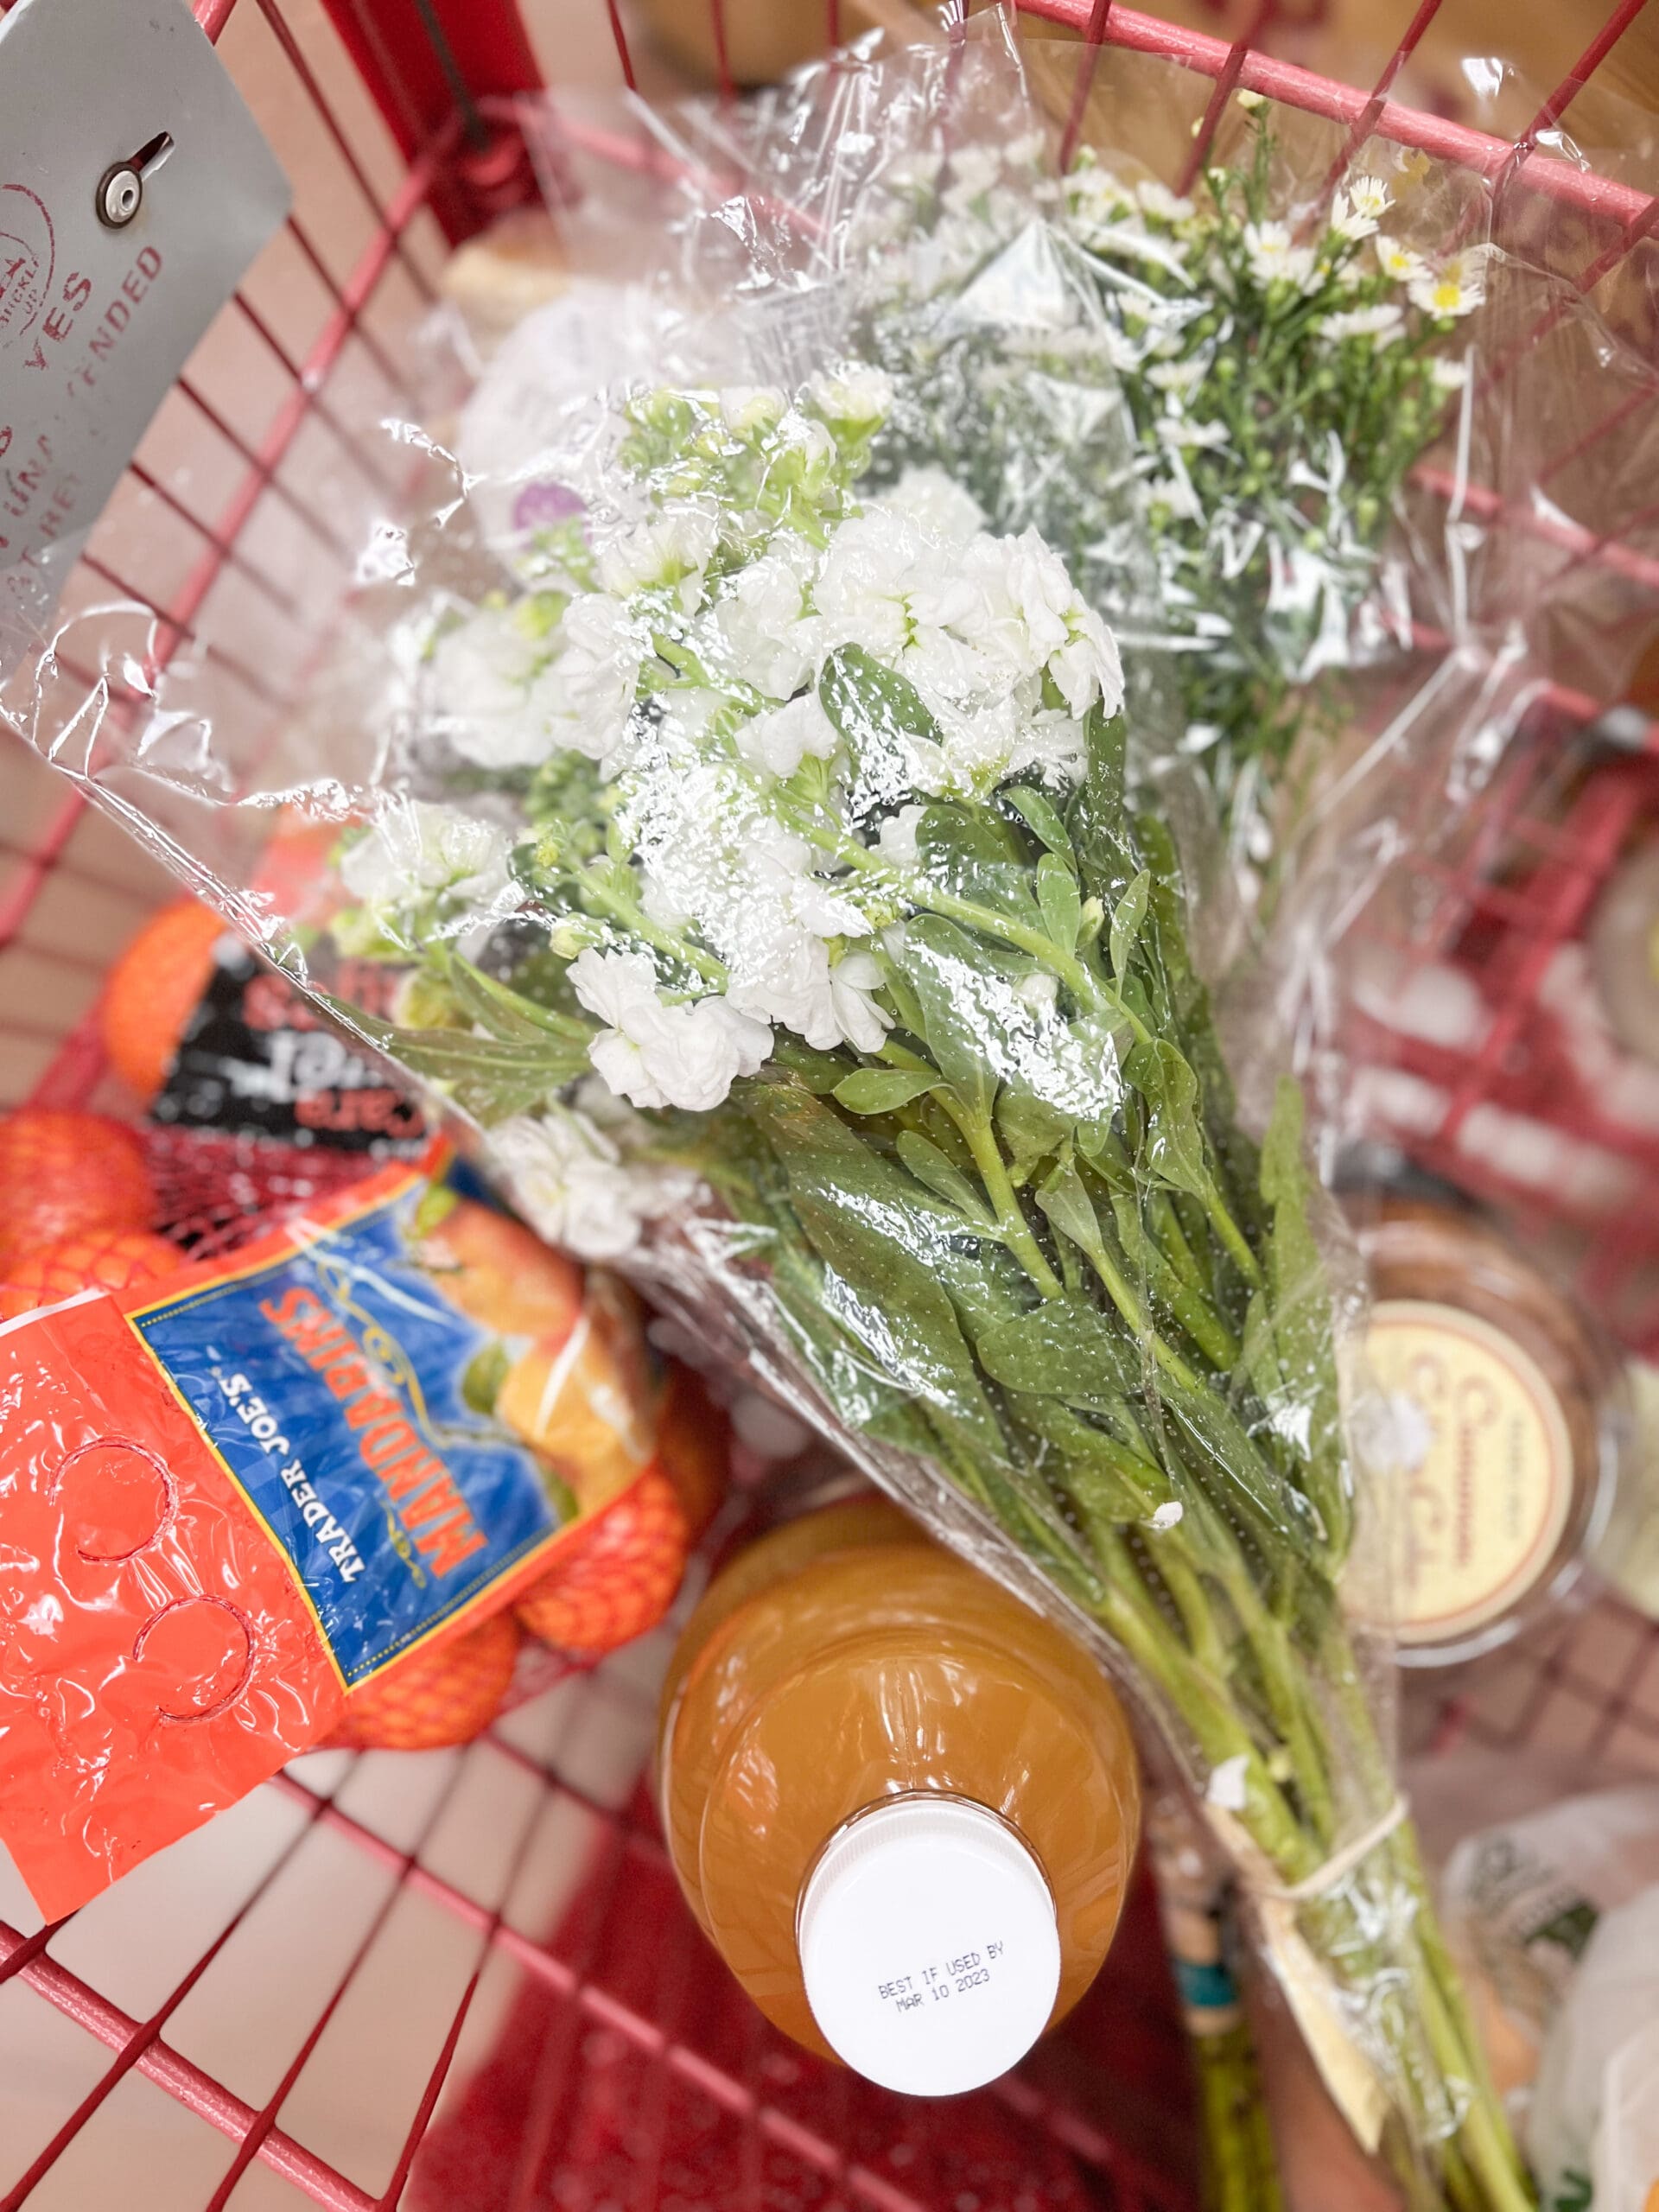 oranges, cider, and fresh white flowers in a shopping cart along with other materials